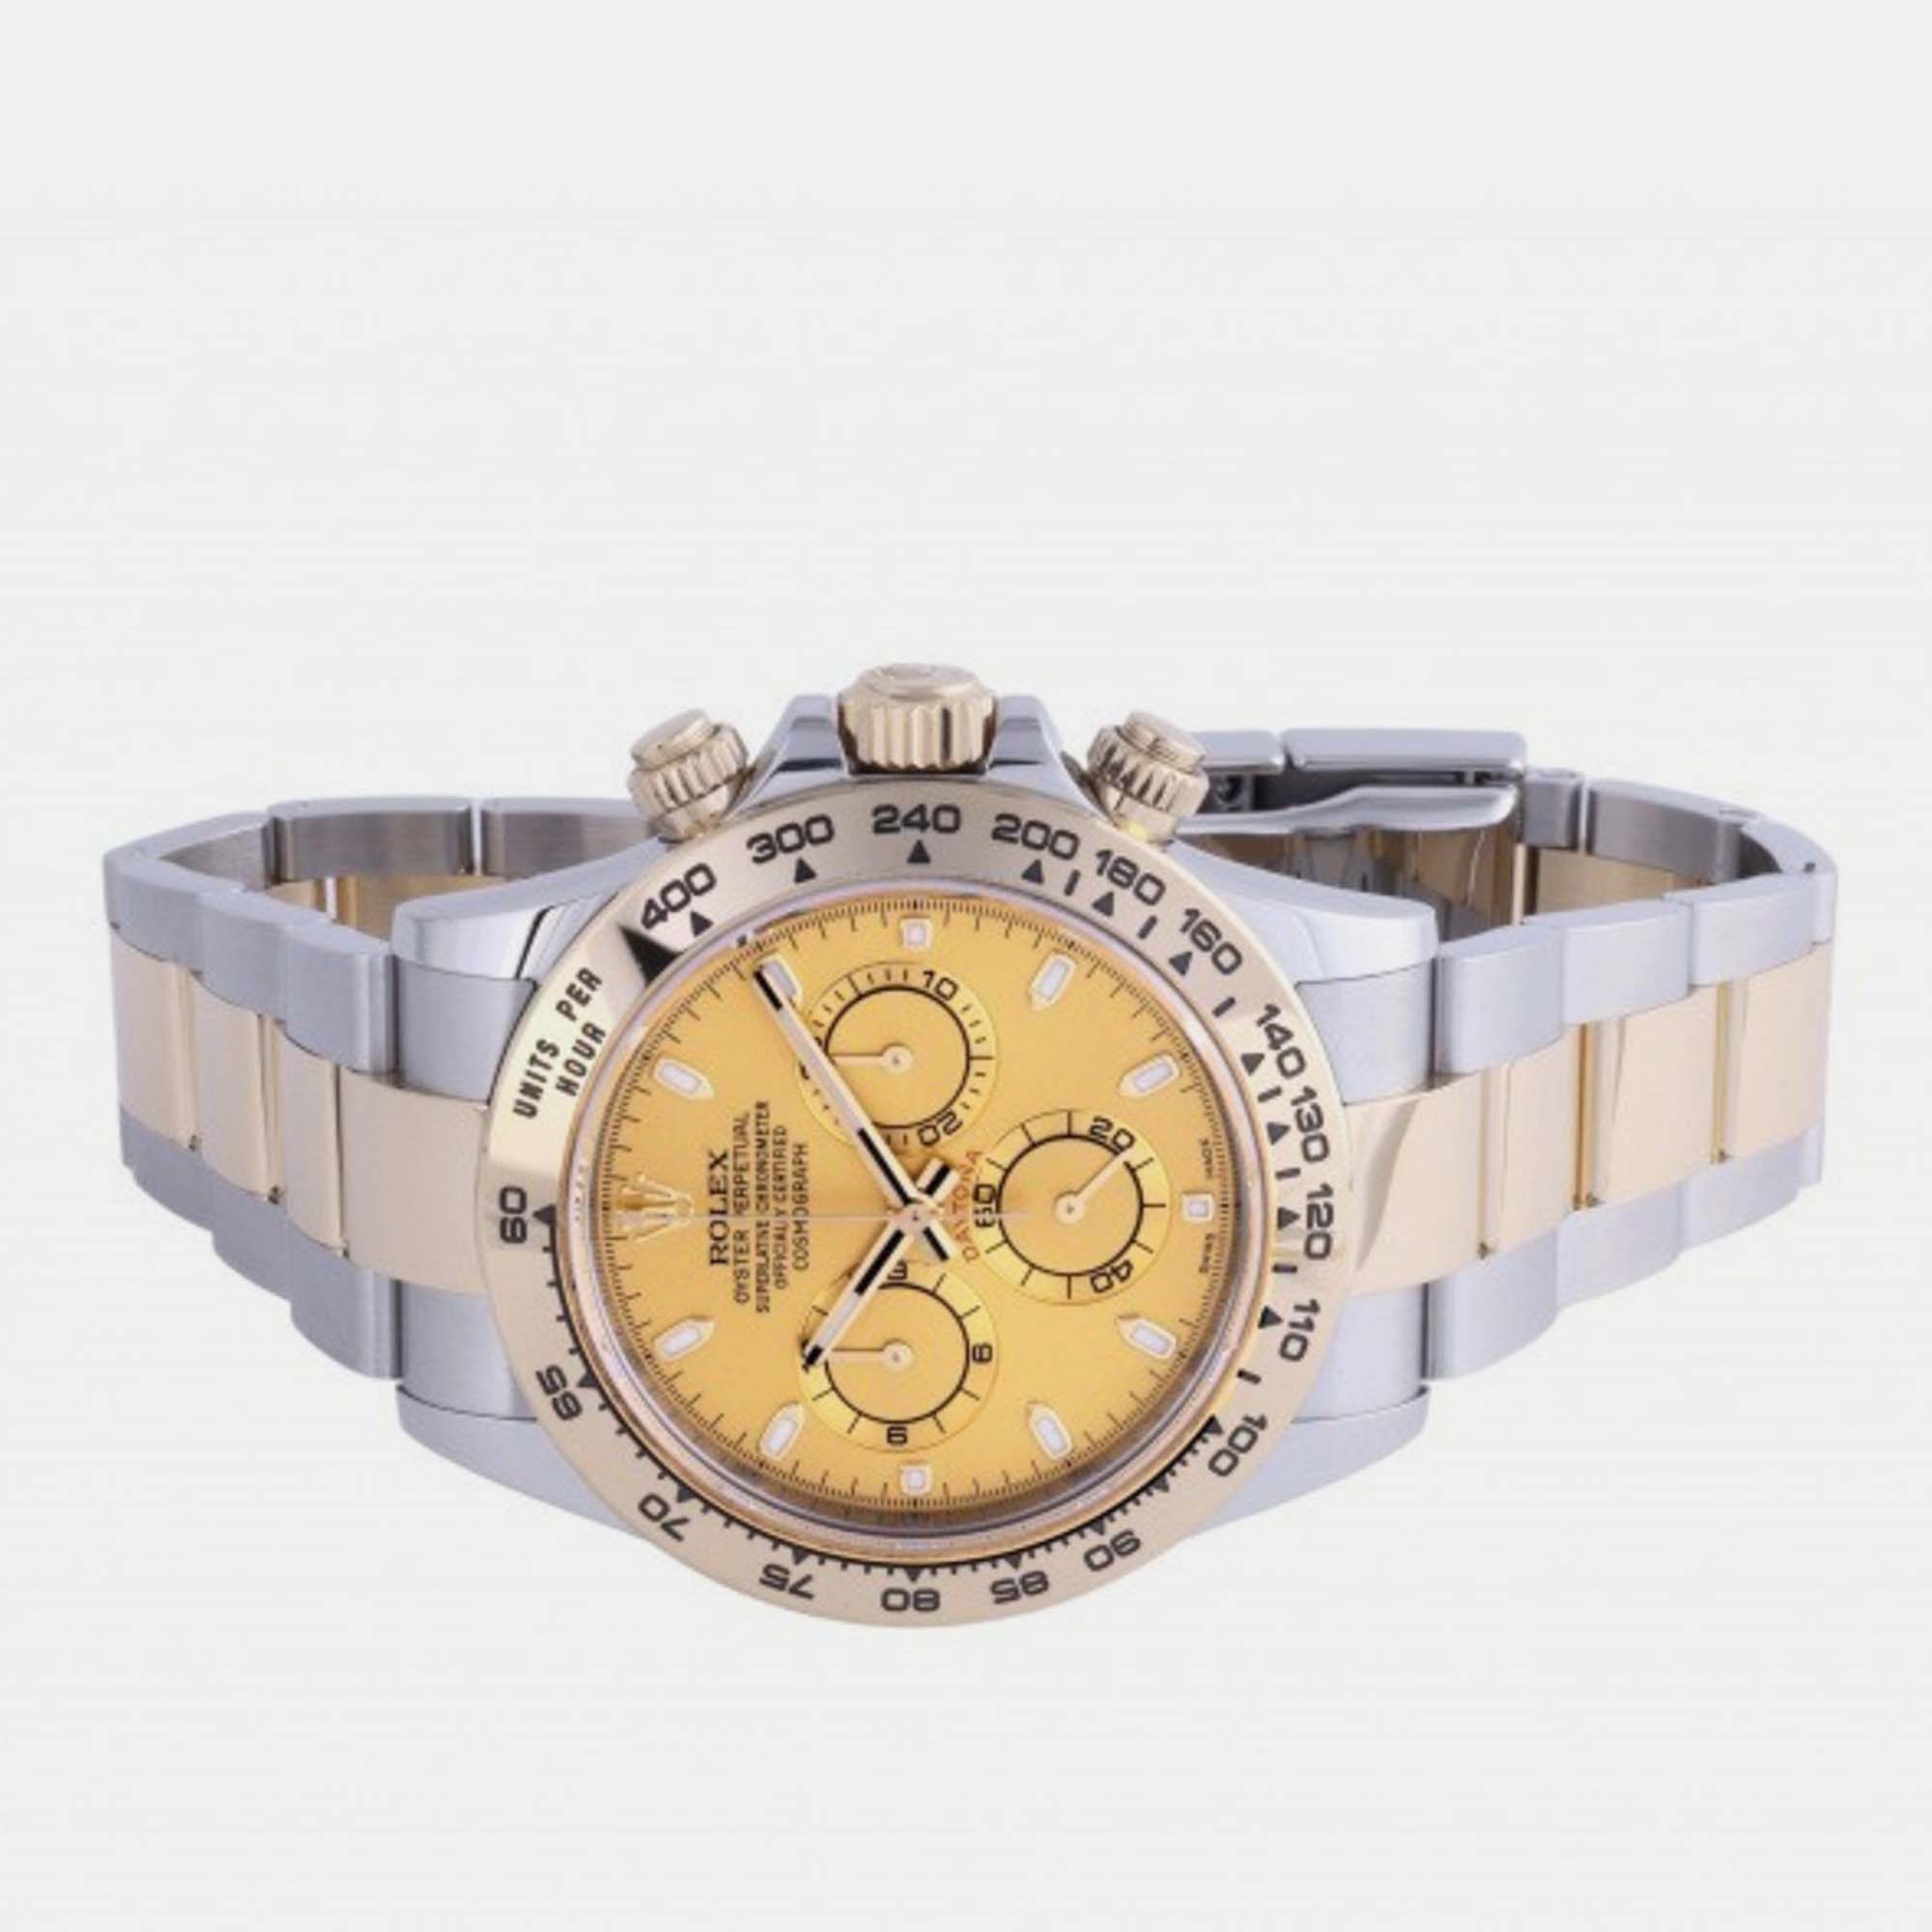 

Rolex Champagne 18k Yellow Gold And Stainless Steel Cosmograph Daytona 116503 Automatic Men's Wristwatch 40 mm